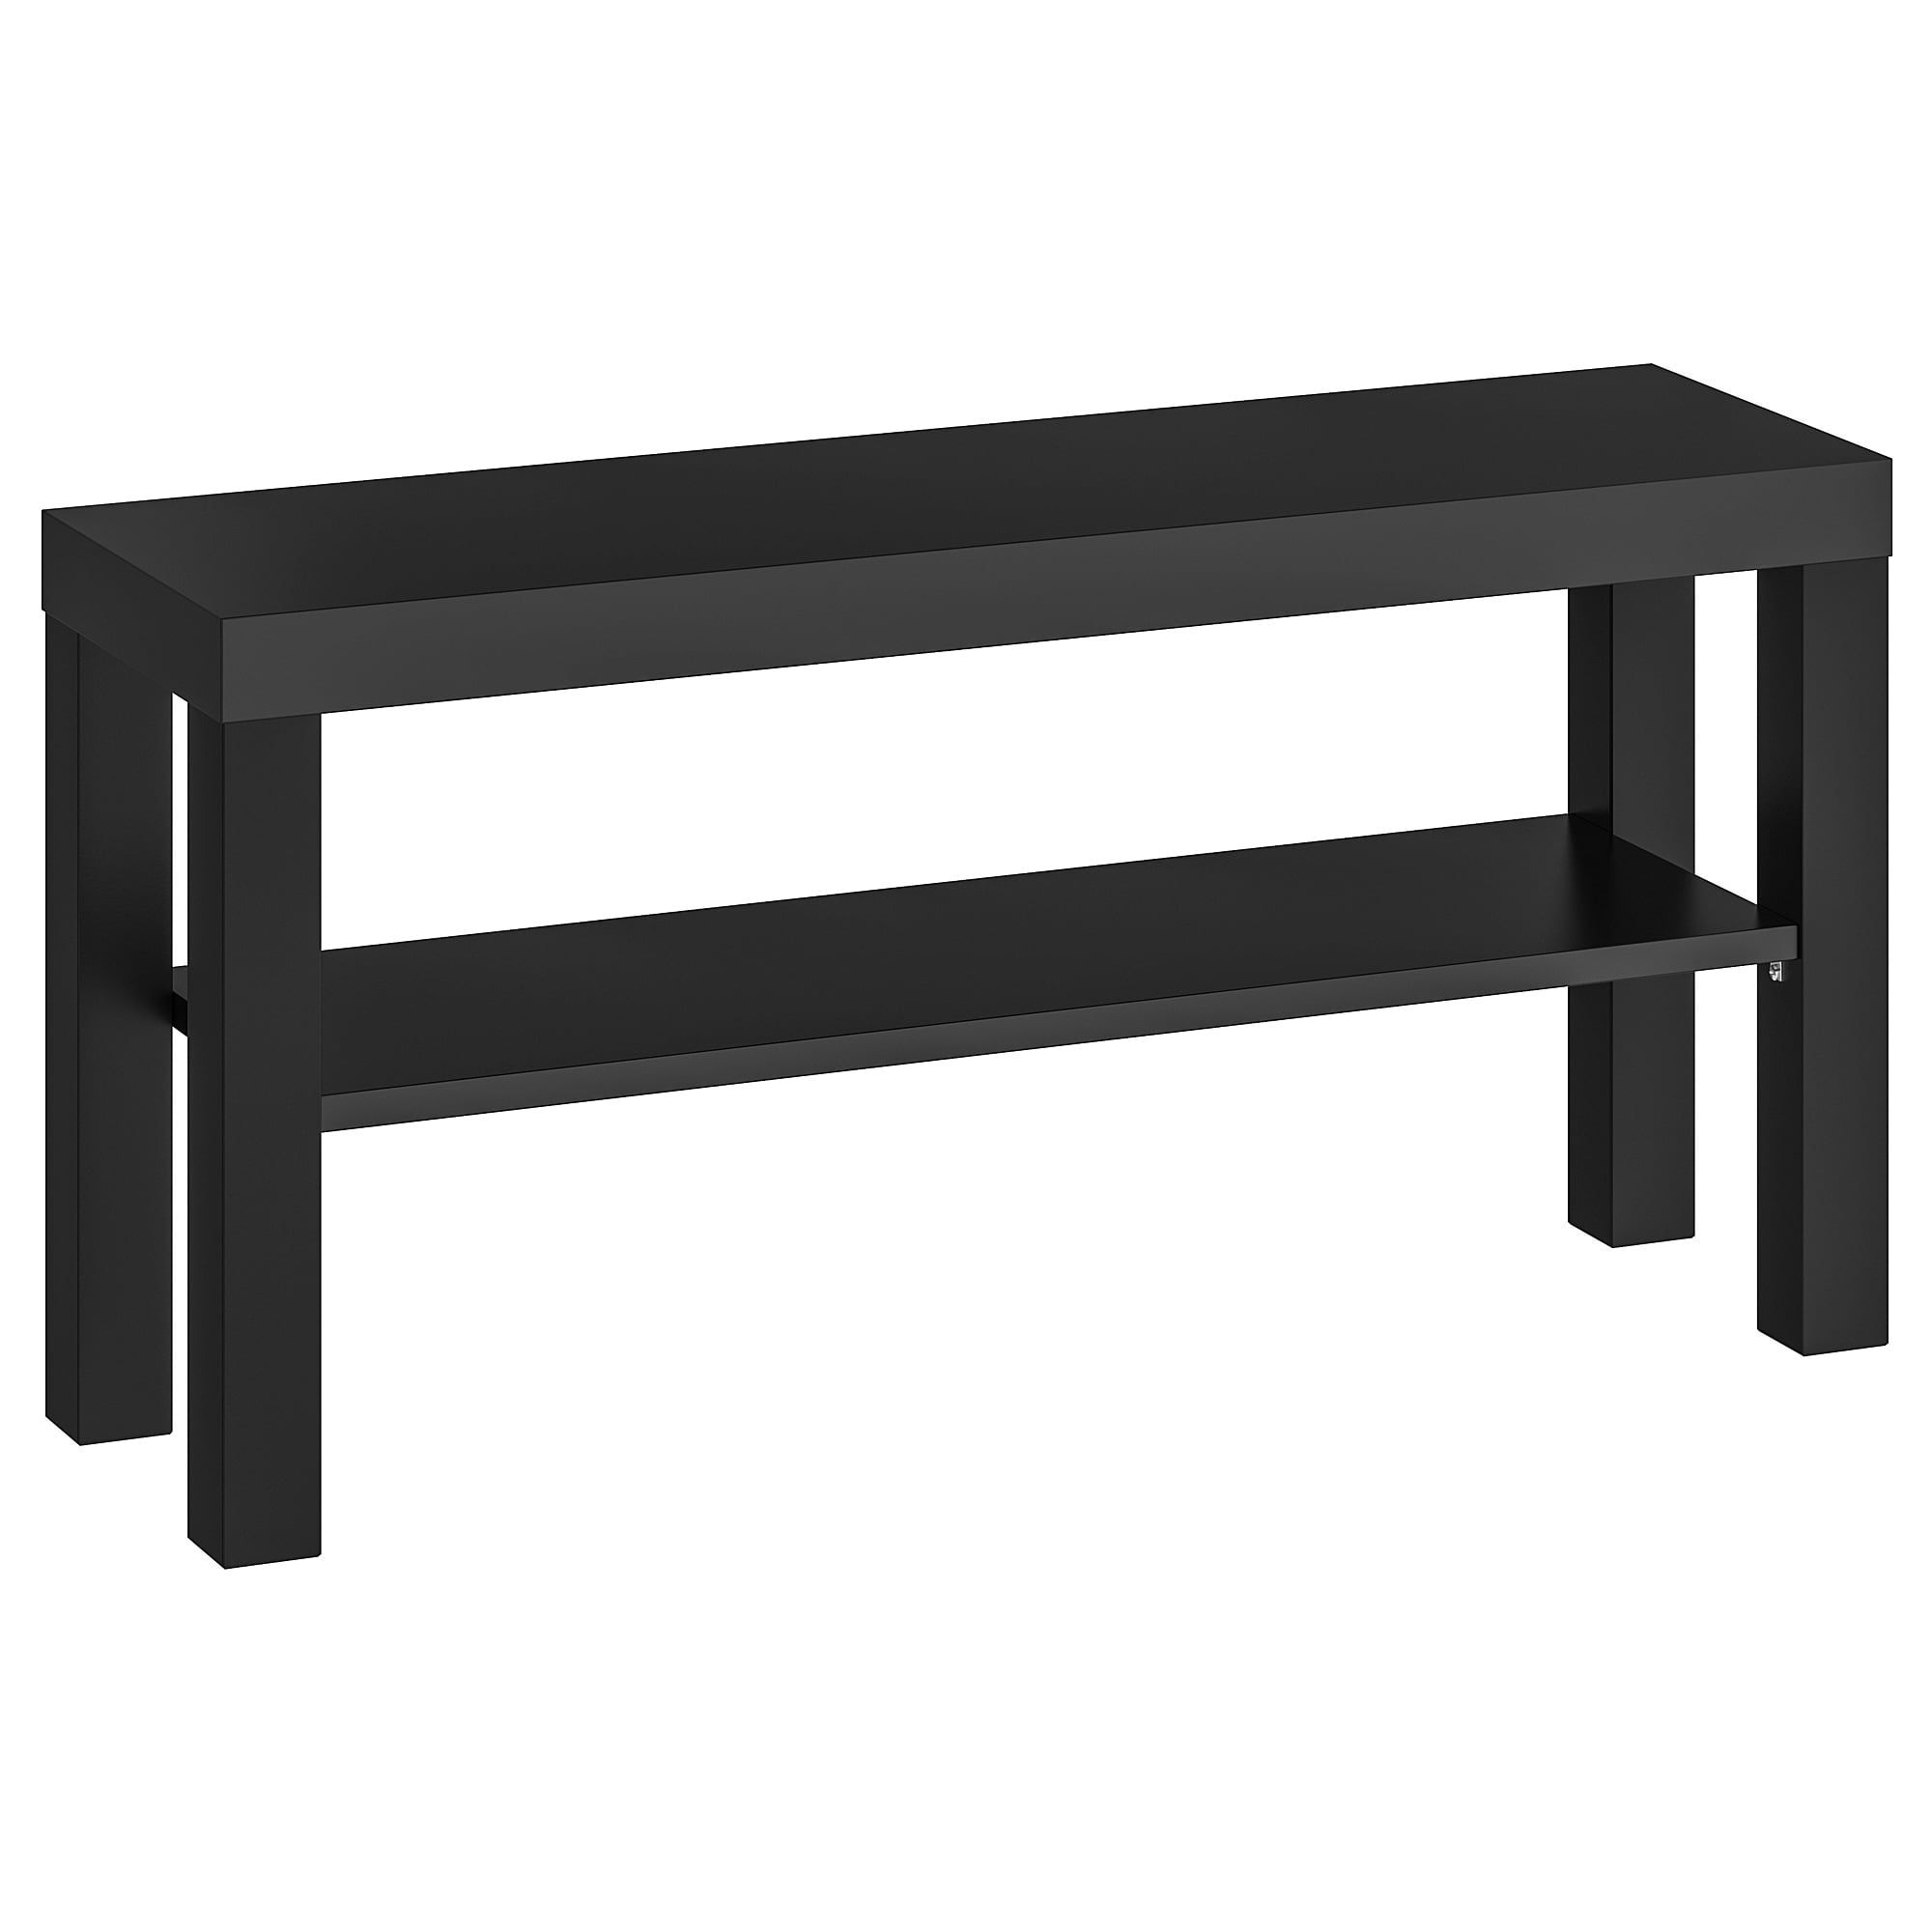 Recent Lack Tv Bench Black 90 X 26 X 45 Cm – Ikea Throughout Ikea Tv Console Tables (View 2 of 20)